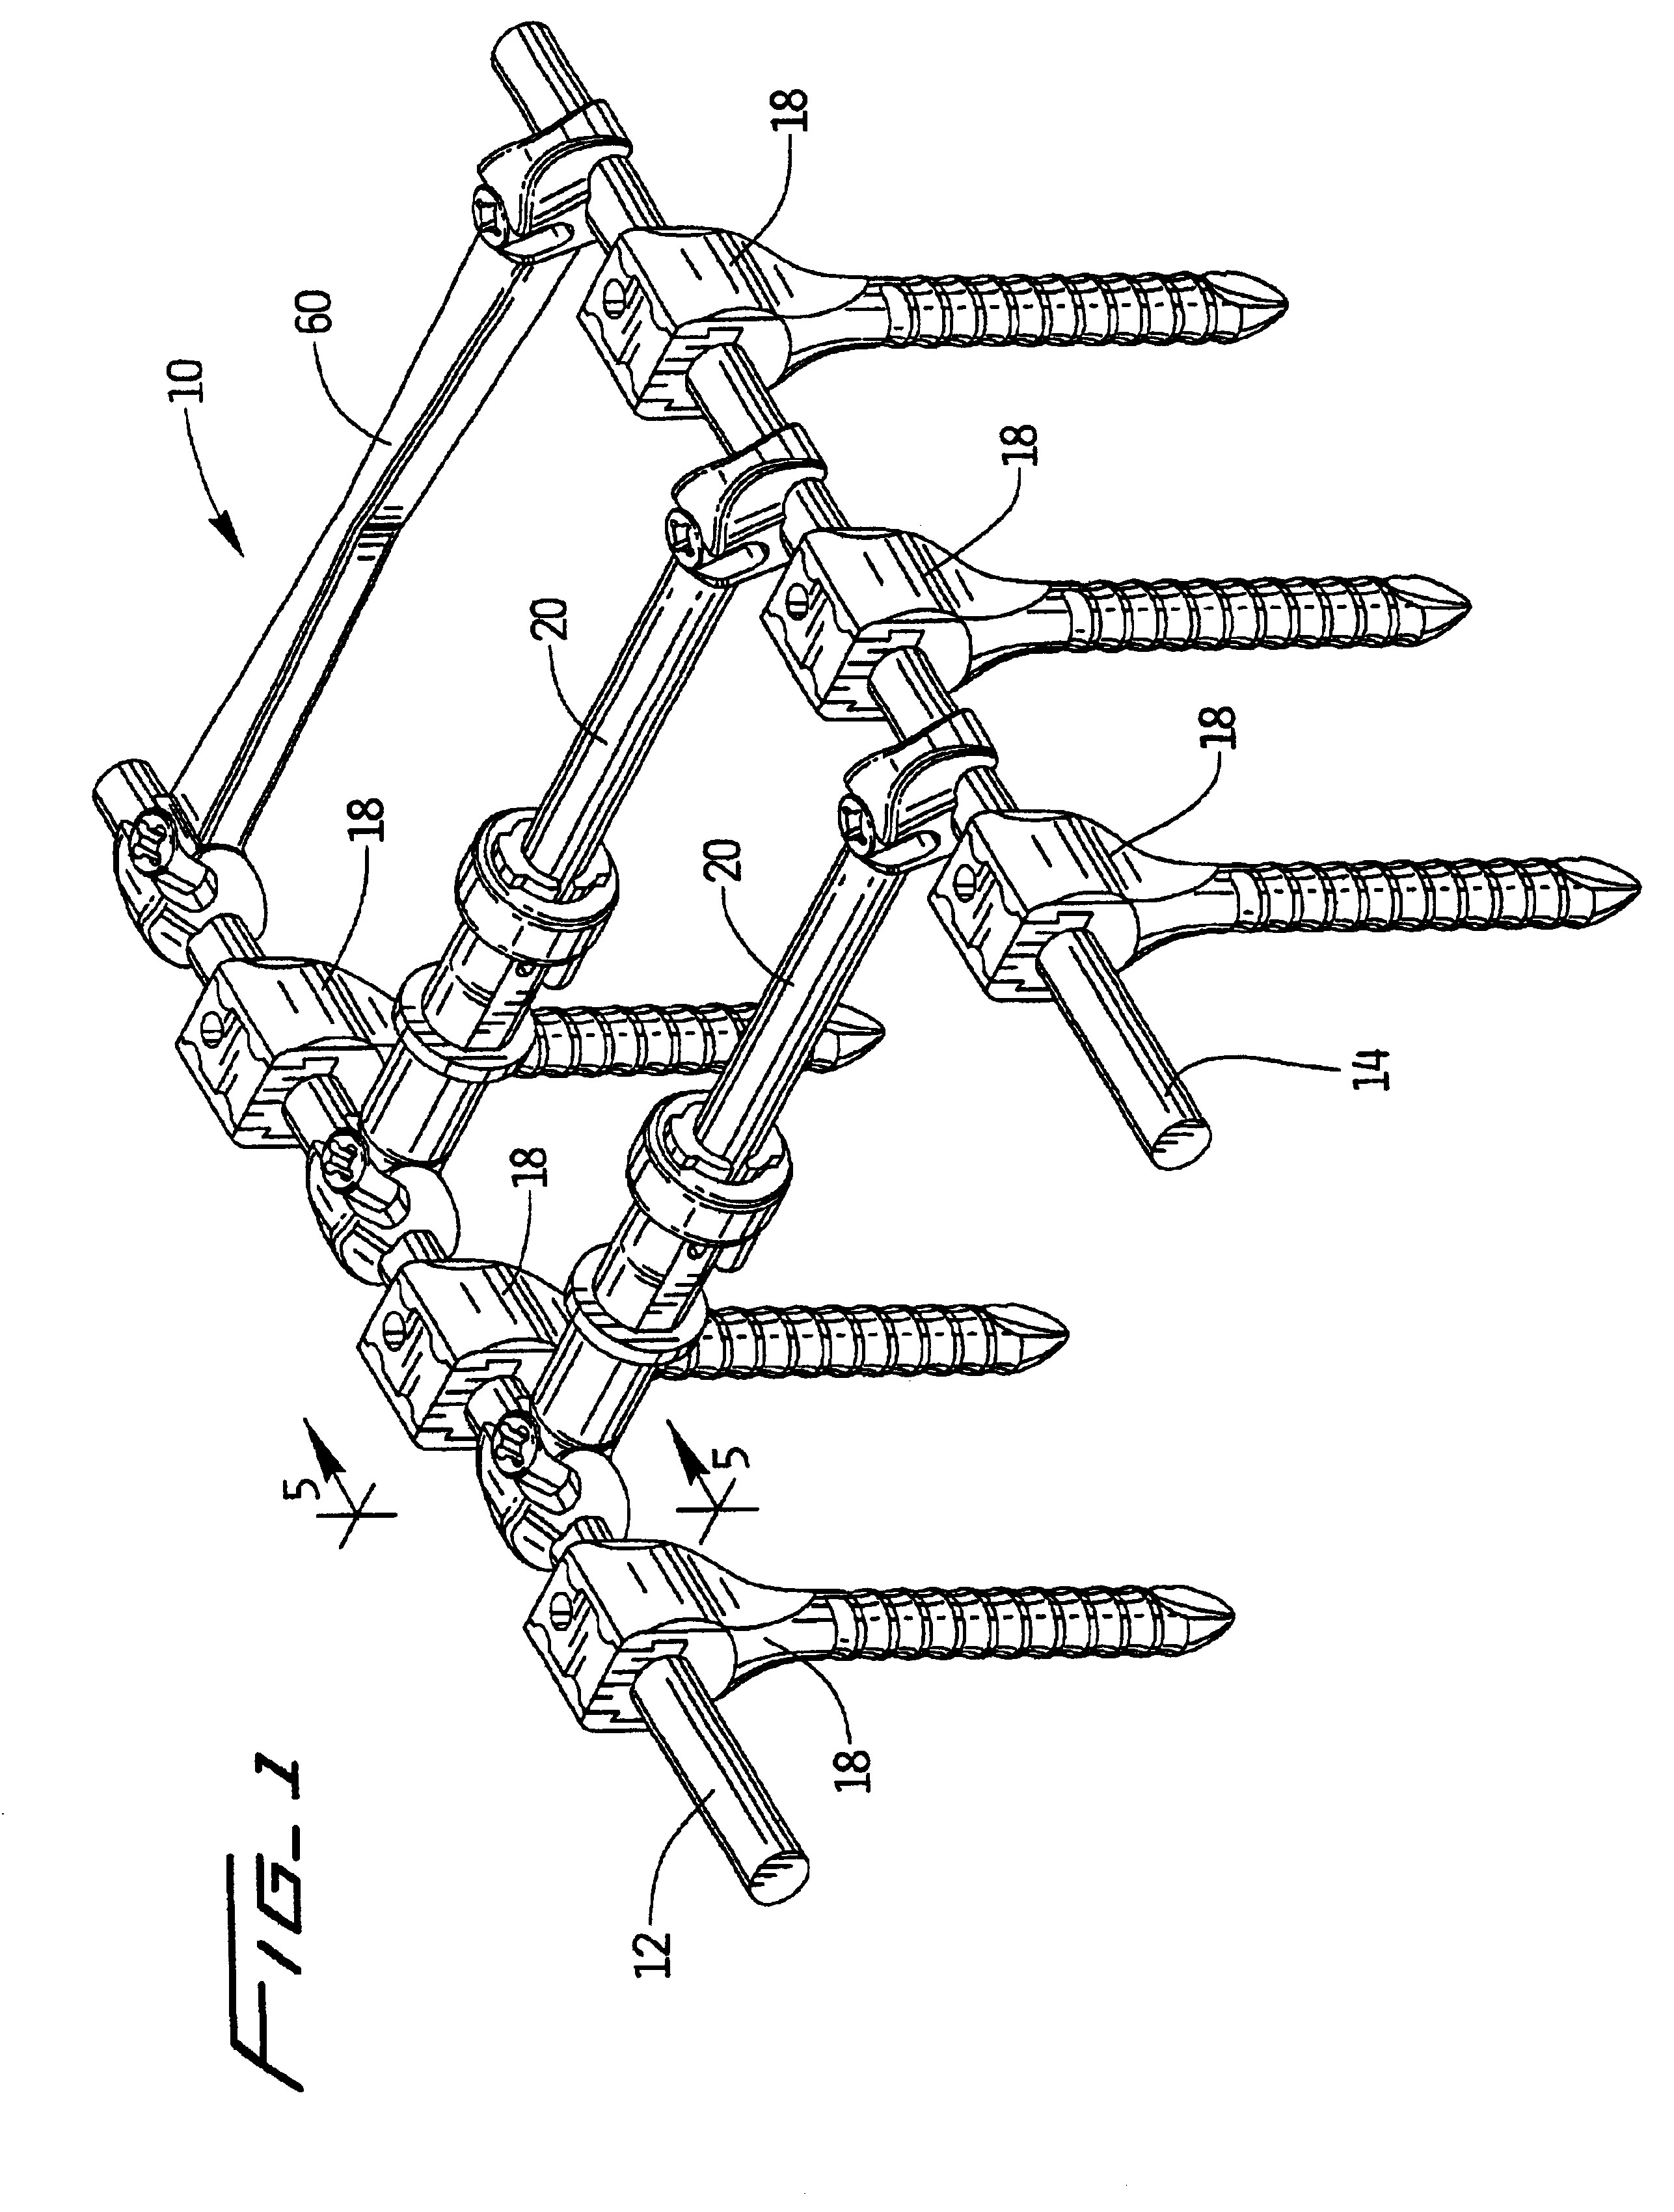 Apparatus for spinal stabilization